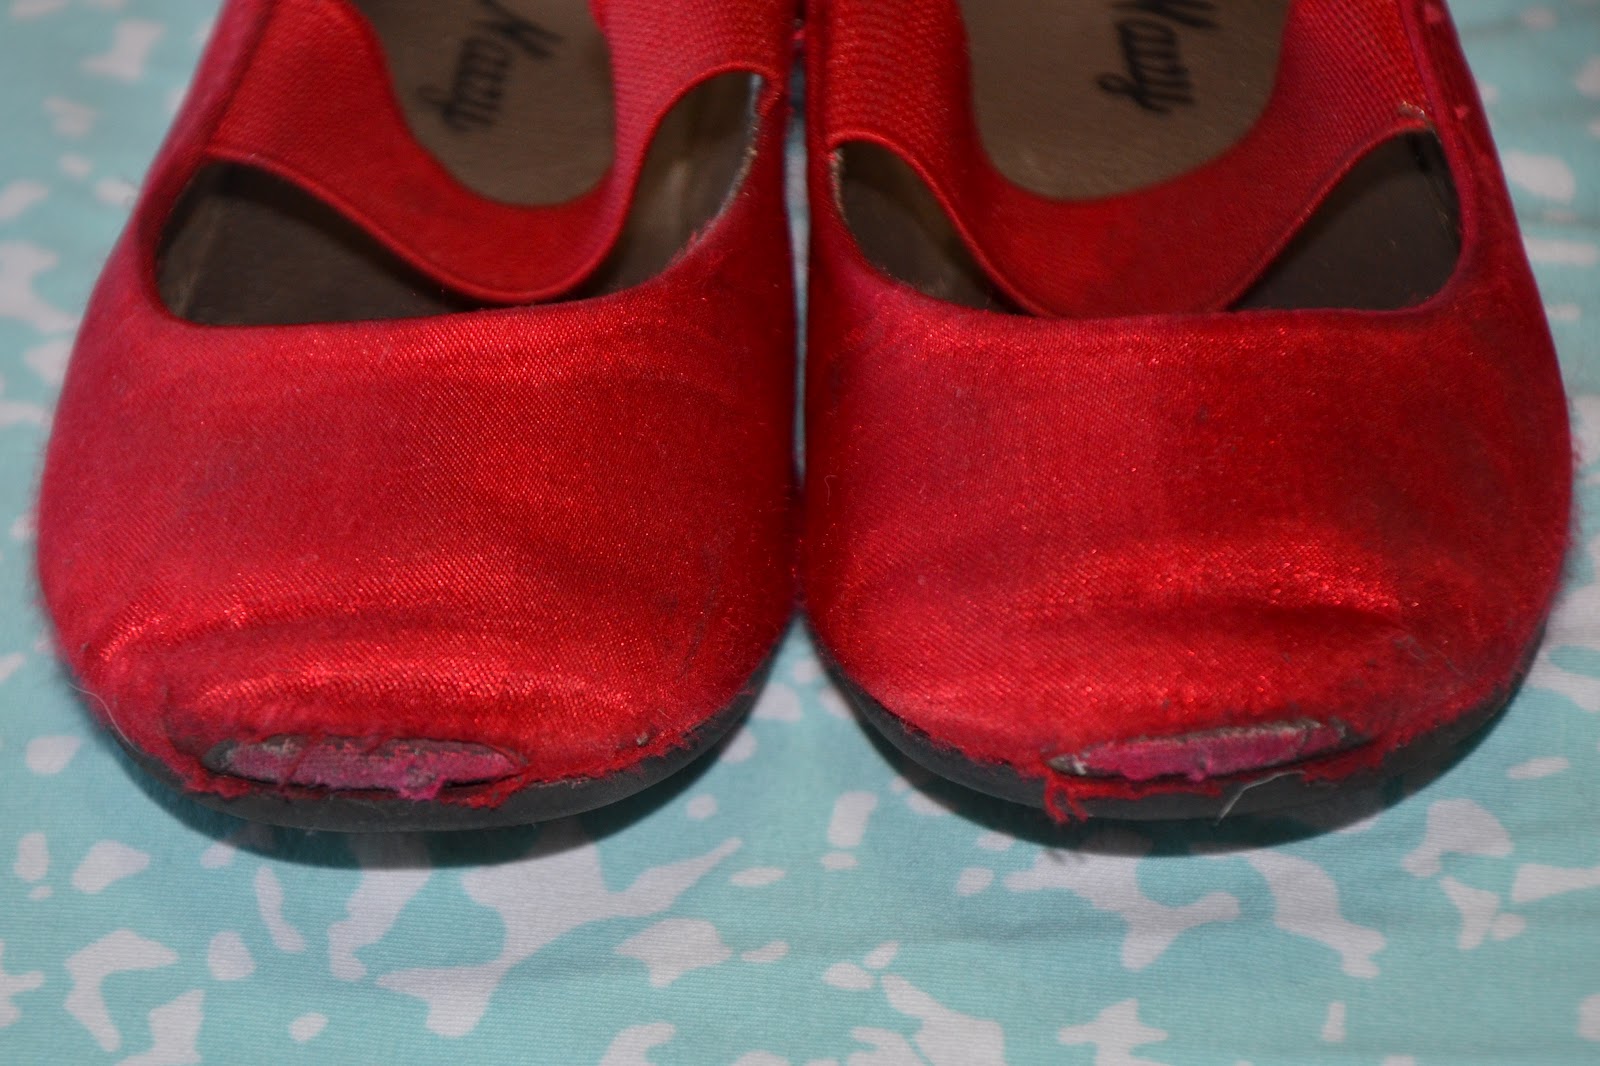 Sparkly Shoes - an Easy Fix to Scuffed Toes | DIY | Before It's News